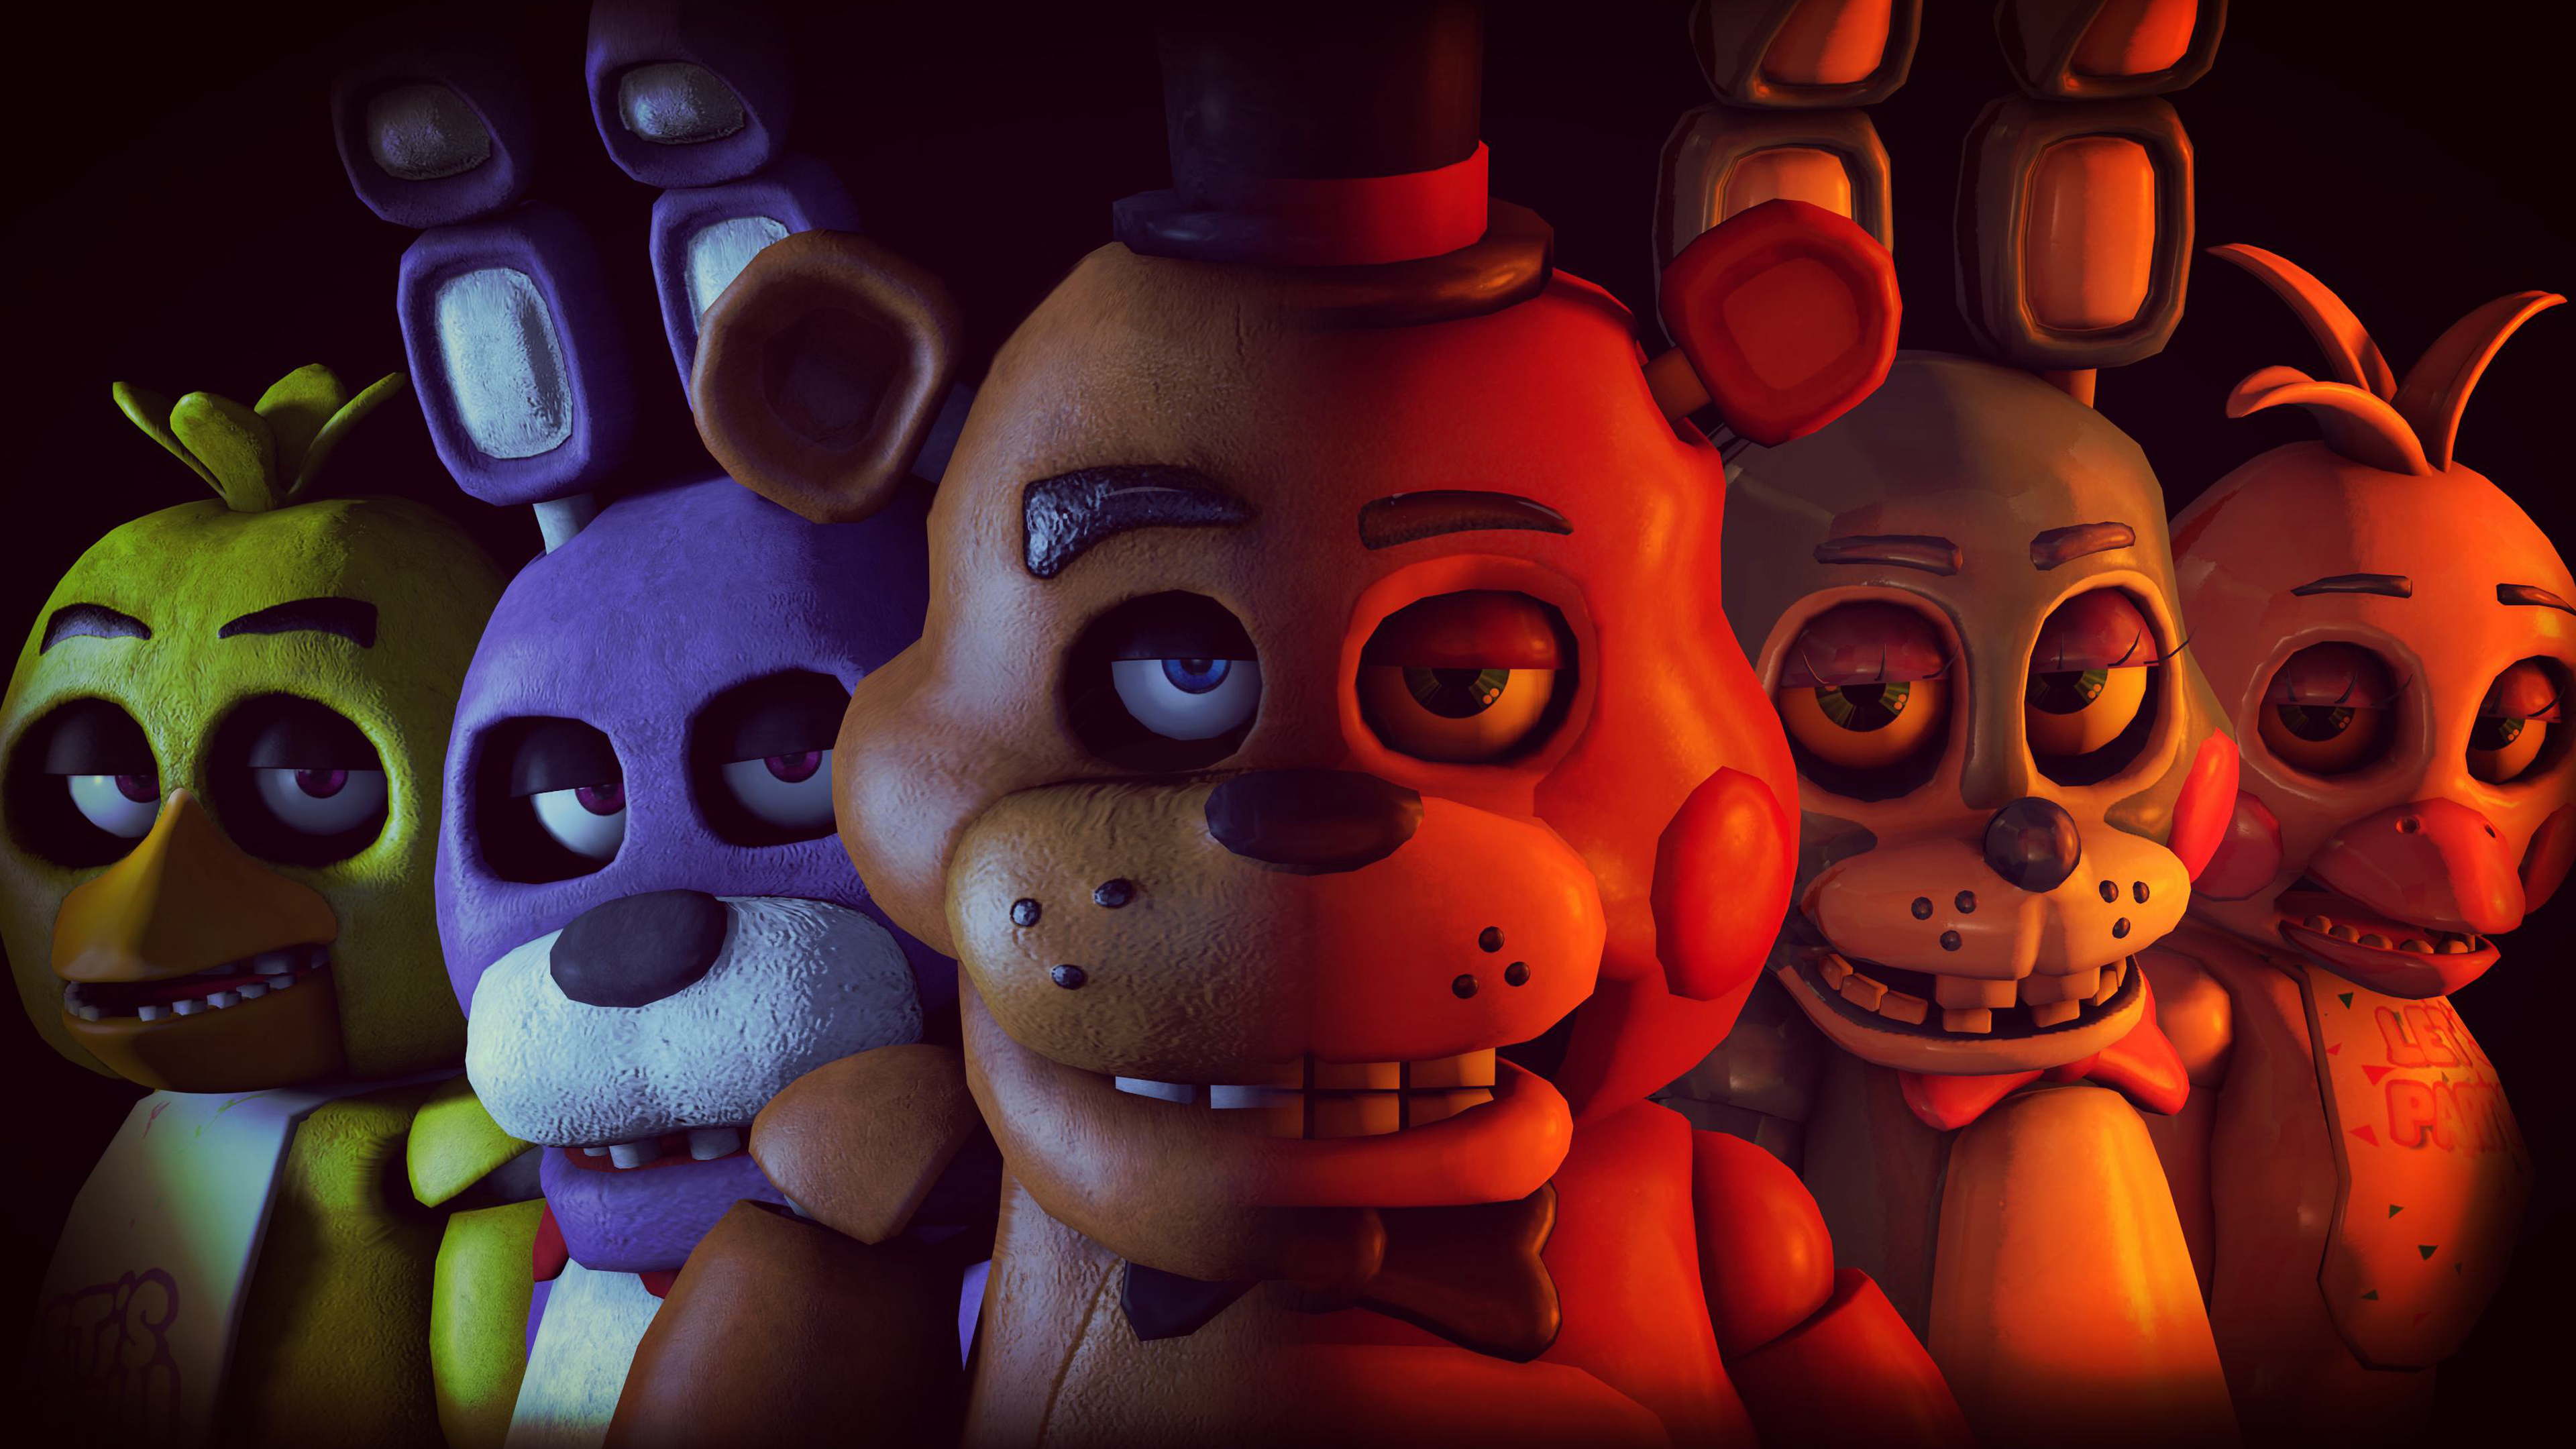 1080p Five Nights At Freddy's Hd Images